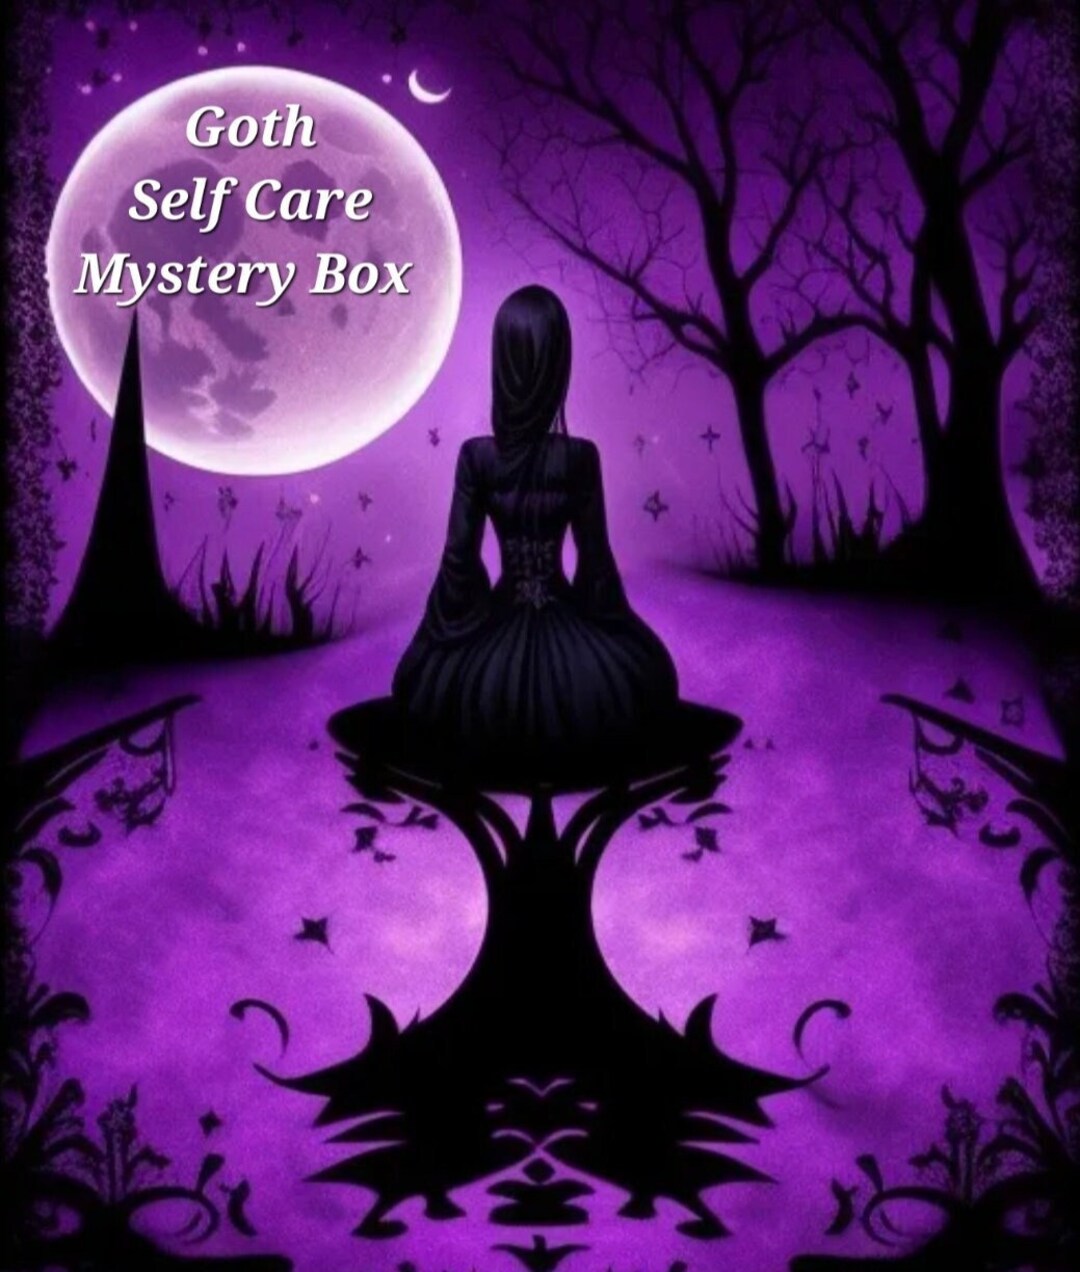 Spooky Halloween Boo Box, Goth Girl Mystery Box, Witchy Woman Gifts, Horror  Gift Box, Self Care Package for Her, Gothic Gifts, Alternative 